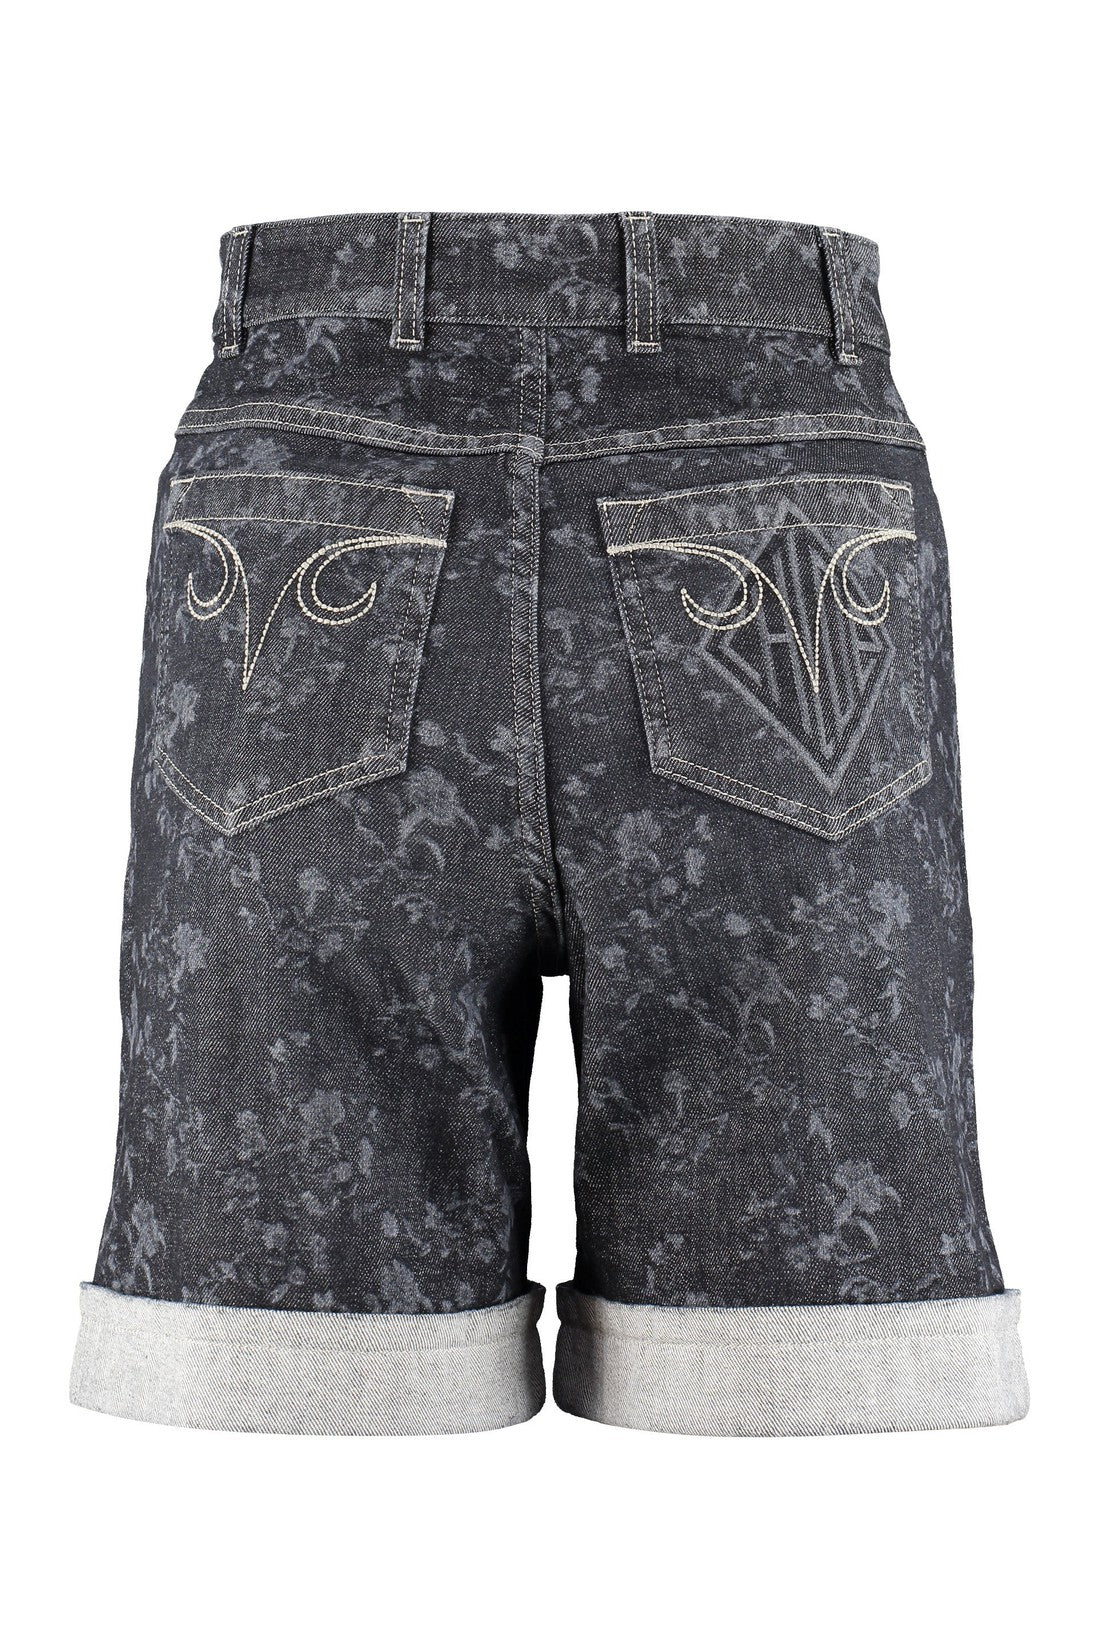 Chloé-OUTLET-SALE-Roll-up cuffed denim shorts-ARCHIVIST